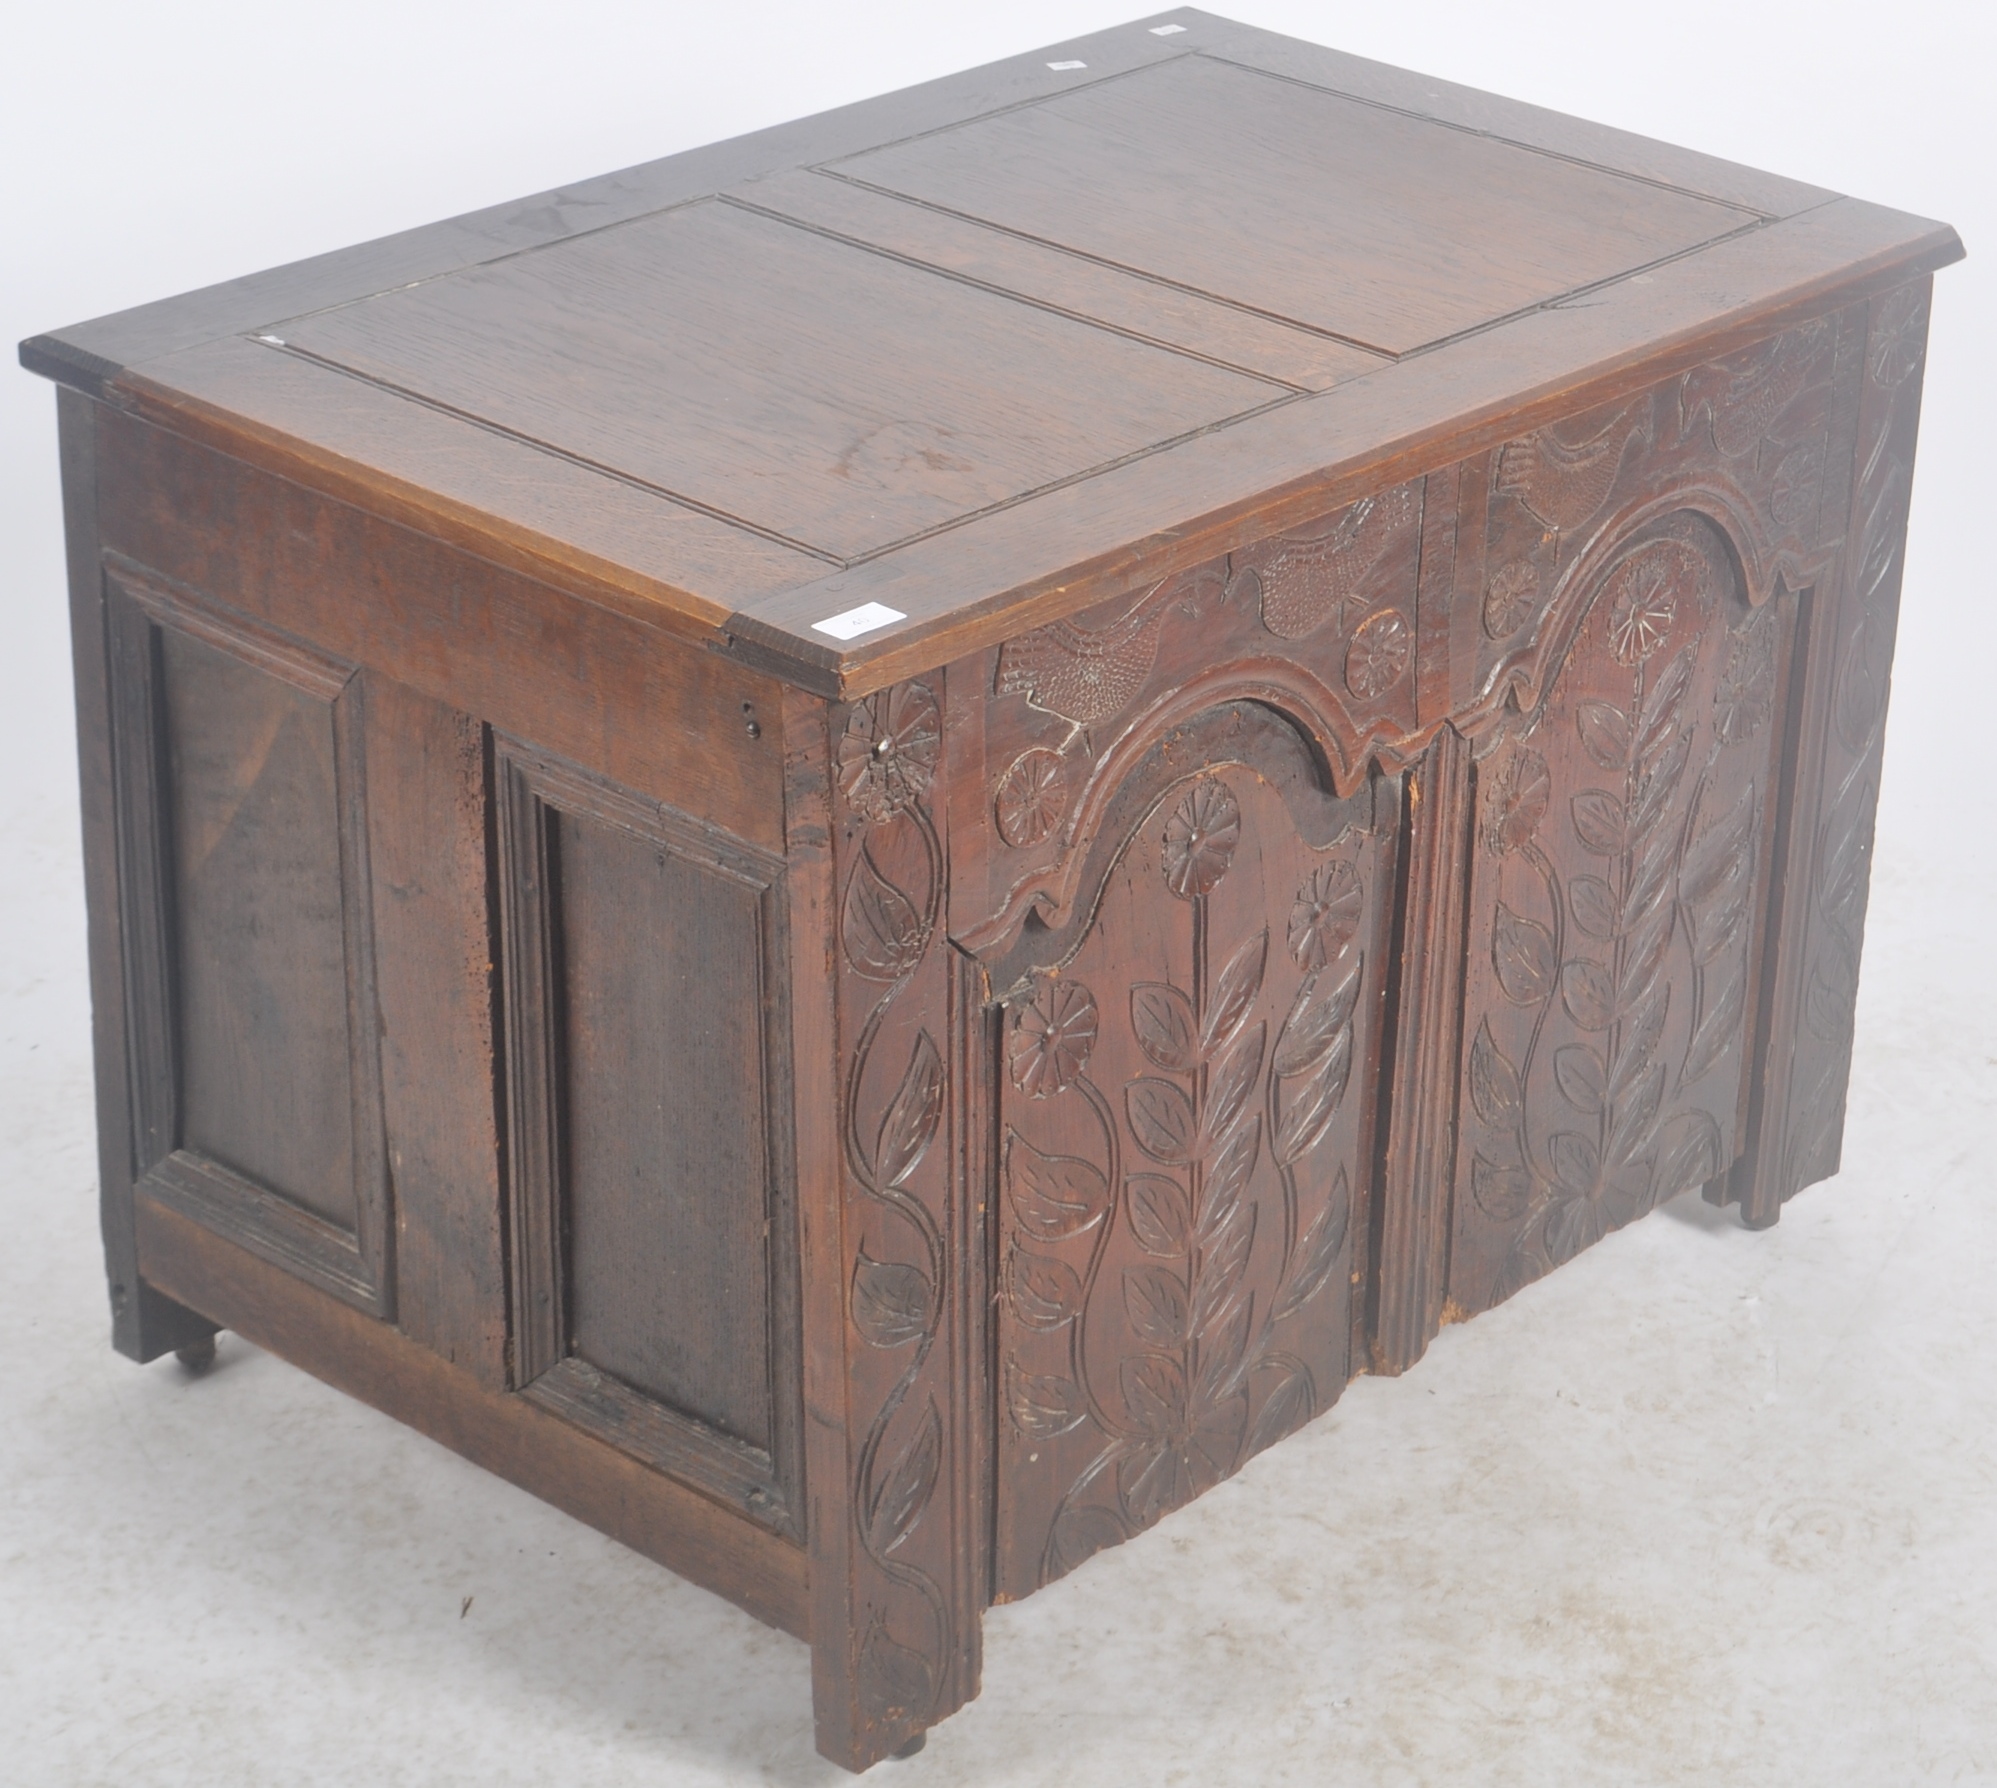 LARGE 18TH CENTURY CARVED OAK COFFER CHEST - Image 2 of 7